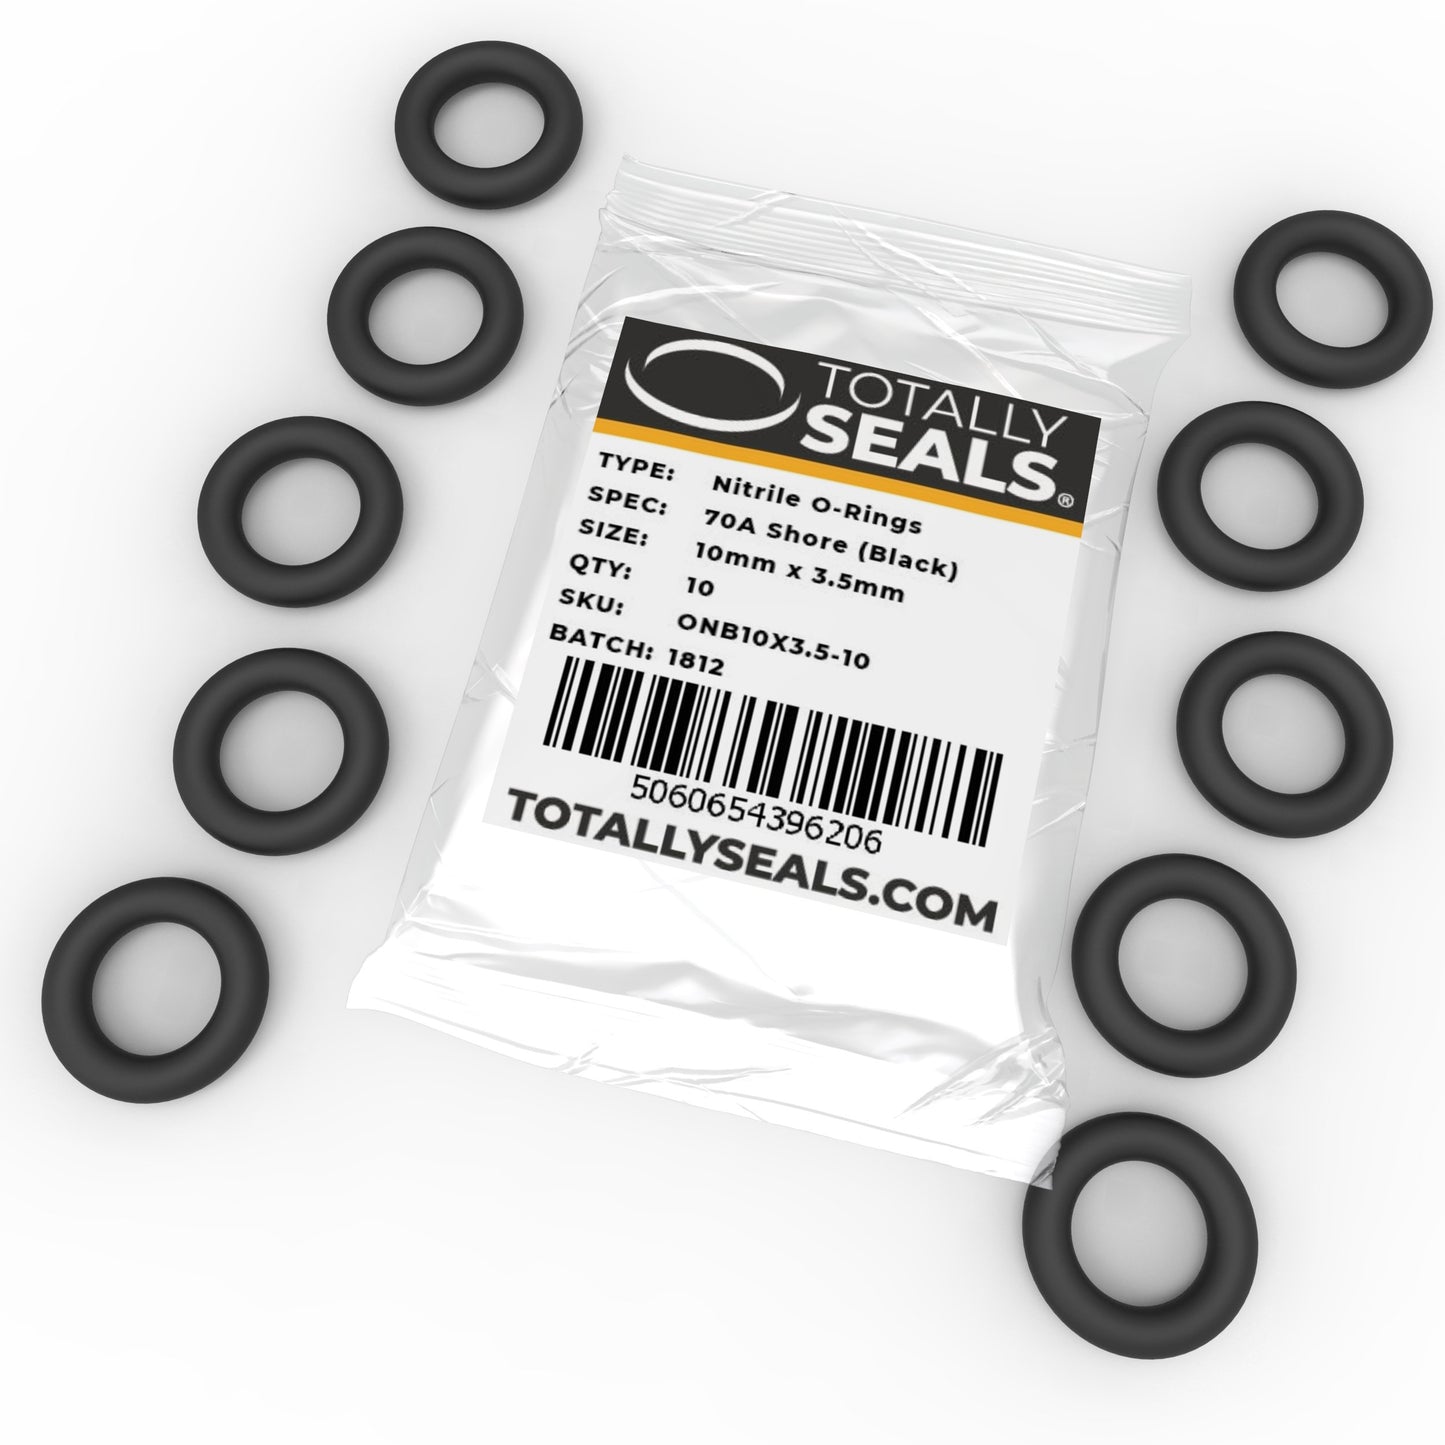 10mm x 3.5mm (17mm OD) Nitrile O-Rings - Totally Seals®